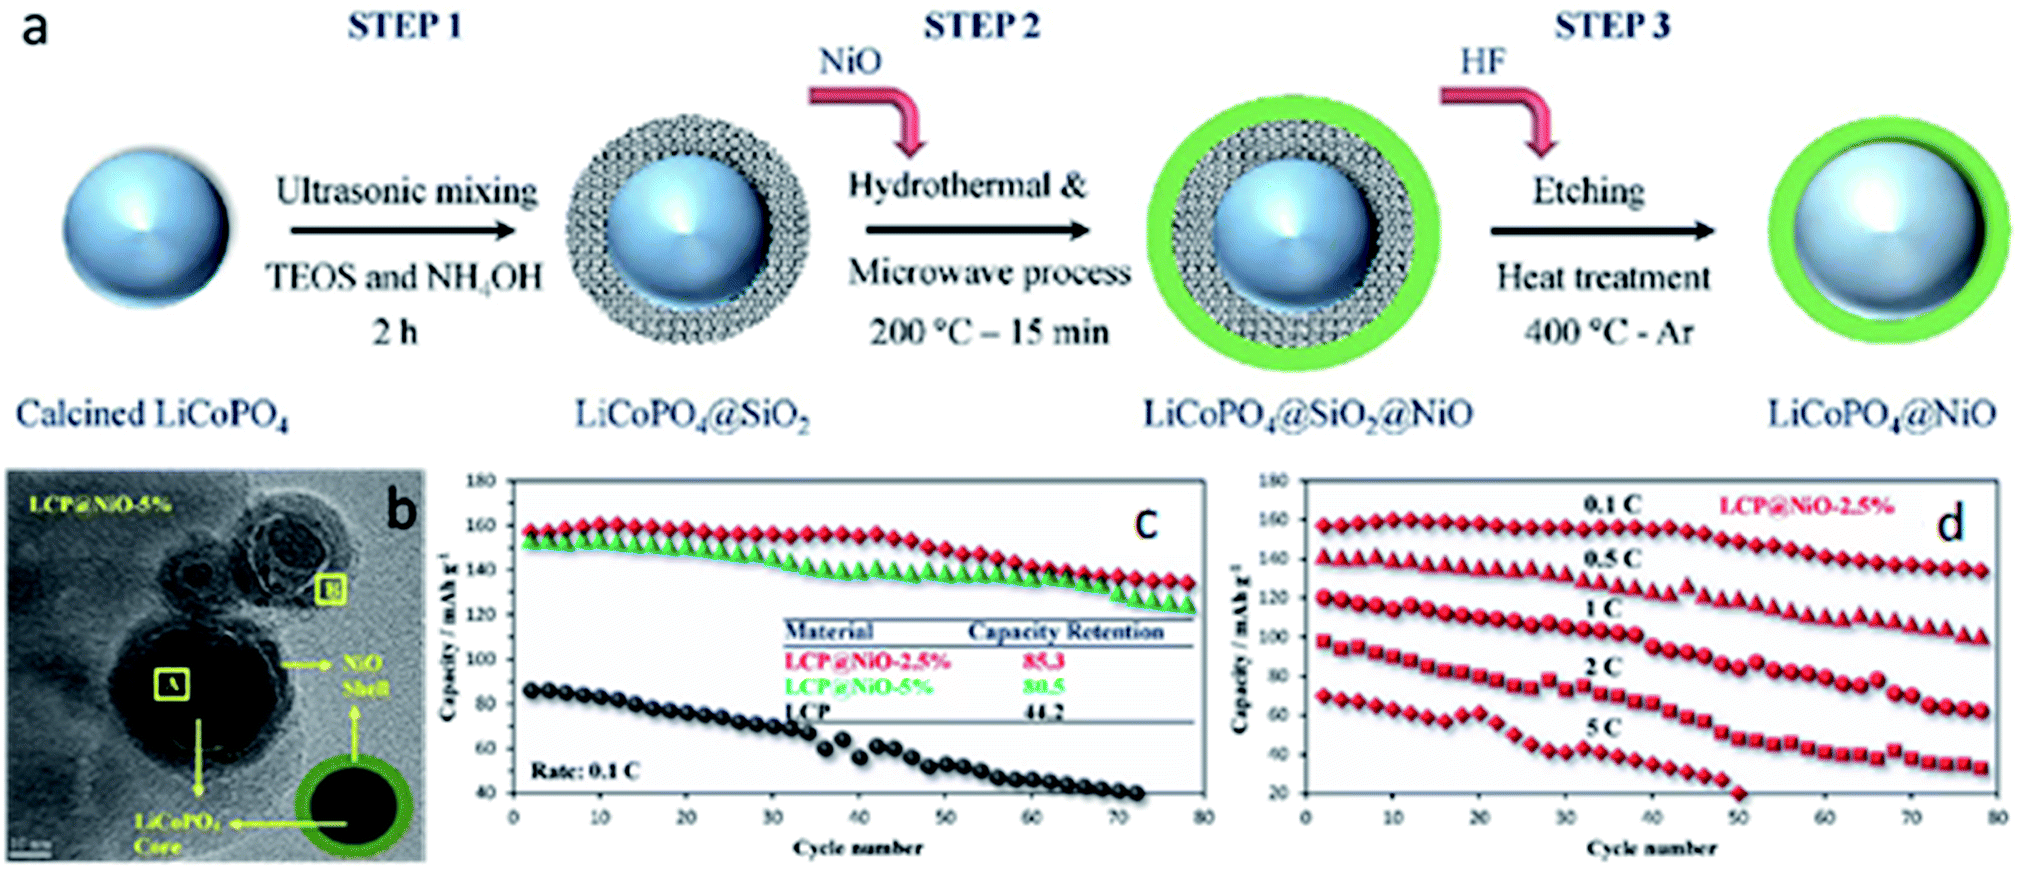 Understanding and development of olivine LiCoPO 4 cathode materials for  lithium-ion batteries - Journal of Materials Chemistry A (RSC Publishing)  DOI:10.1039/C8TA04063J